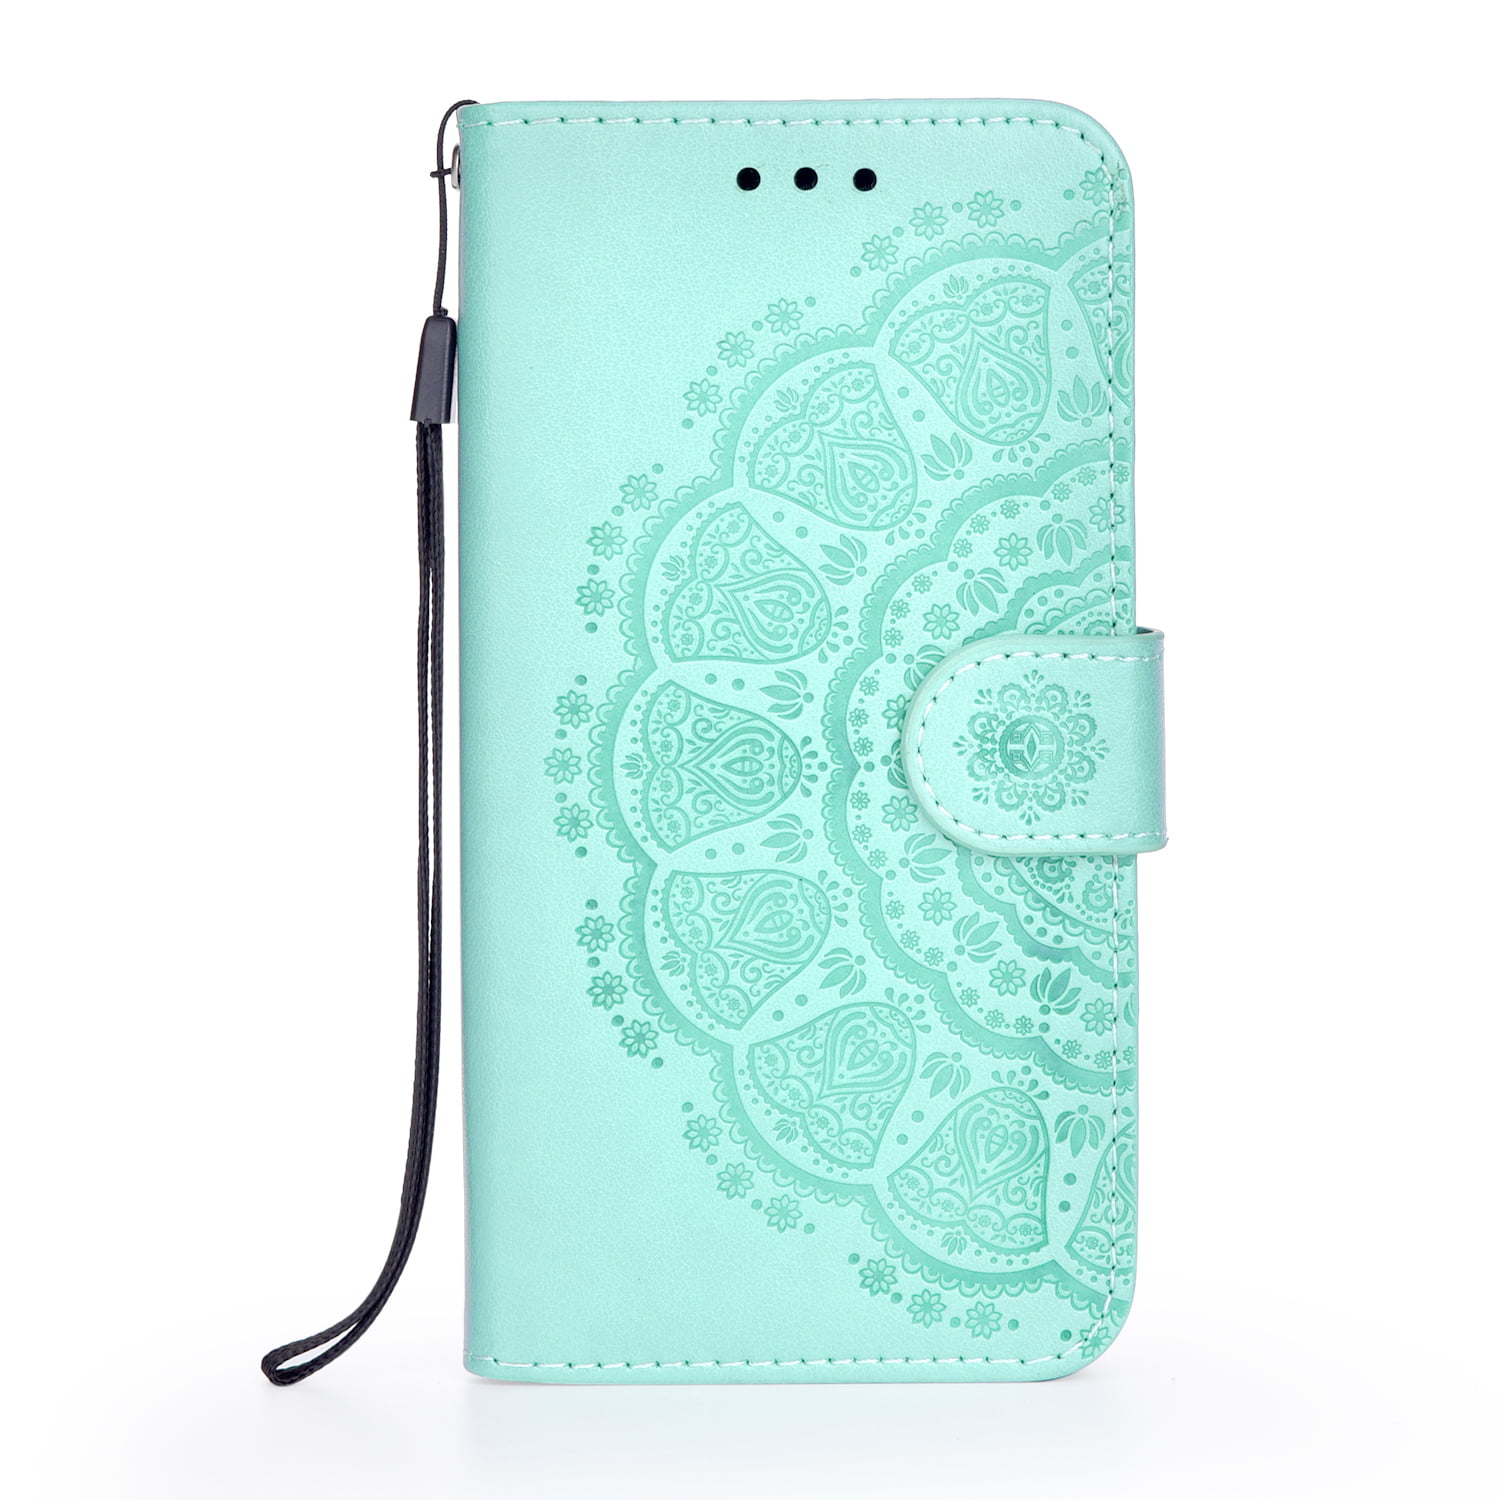 IKASEFU Emboss butterfly Flower Floral Pu Leather Wallet Strap Case Card Slots Shockproof Magnetic Folio Flip Kickstand Feature Protective Soft Bumper Cover Case Compatible with Huawei honor 8X,blue